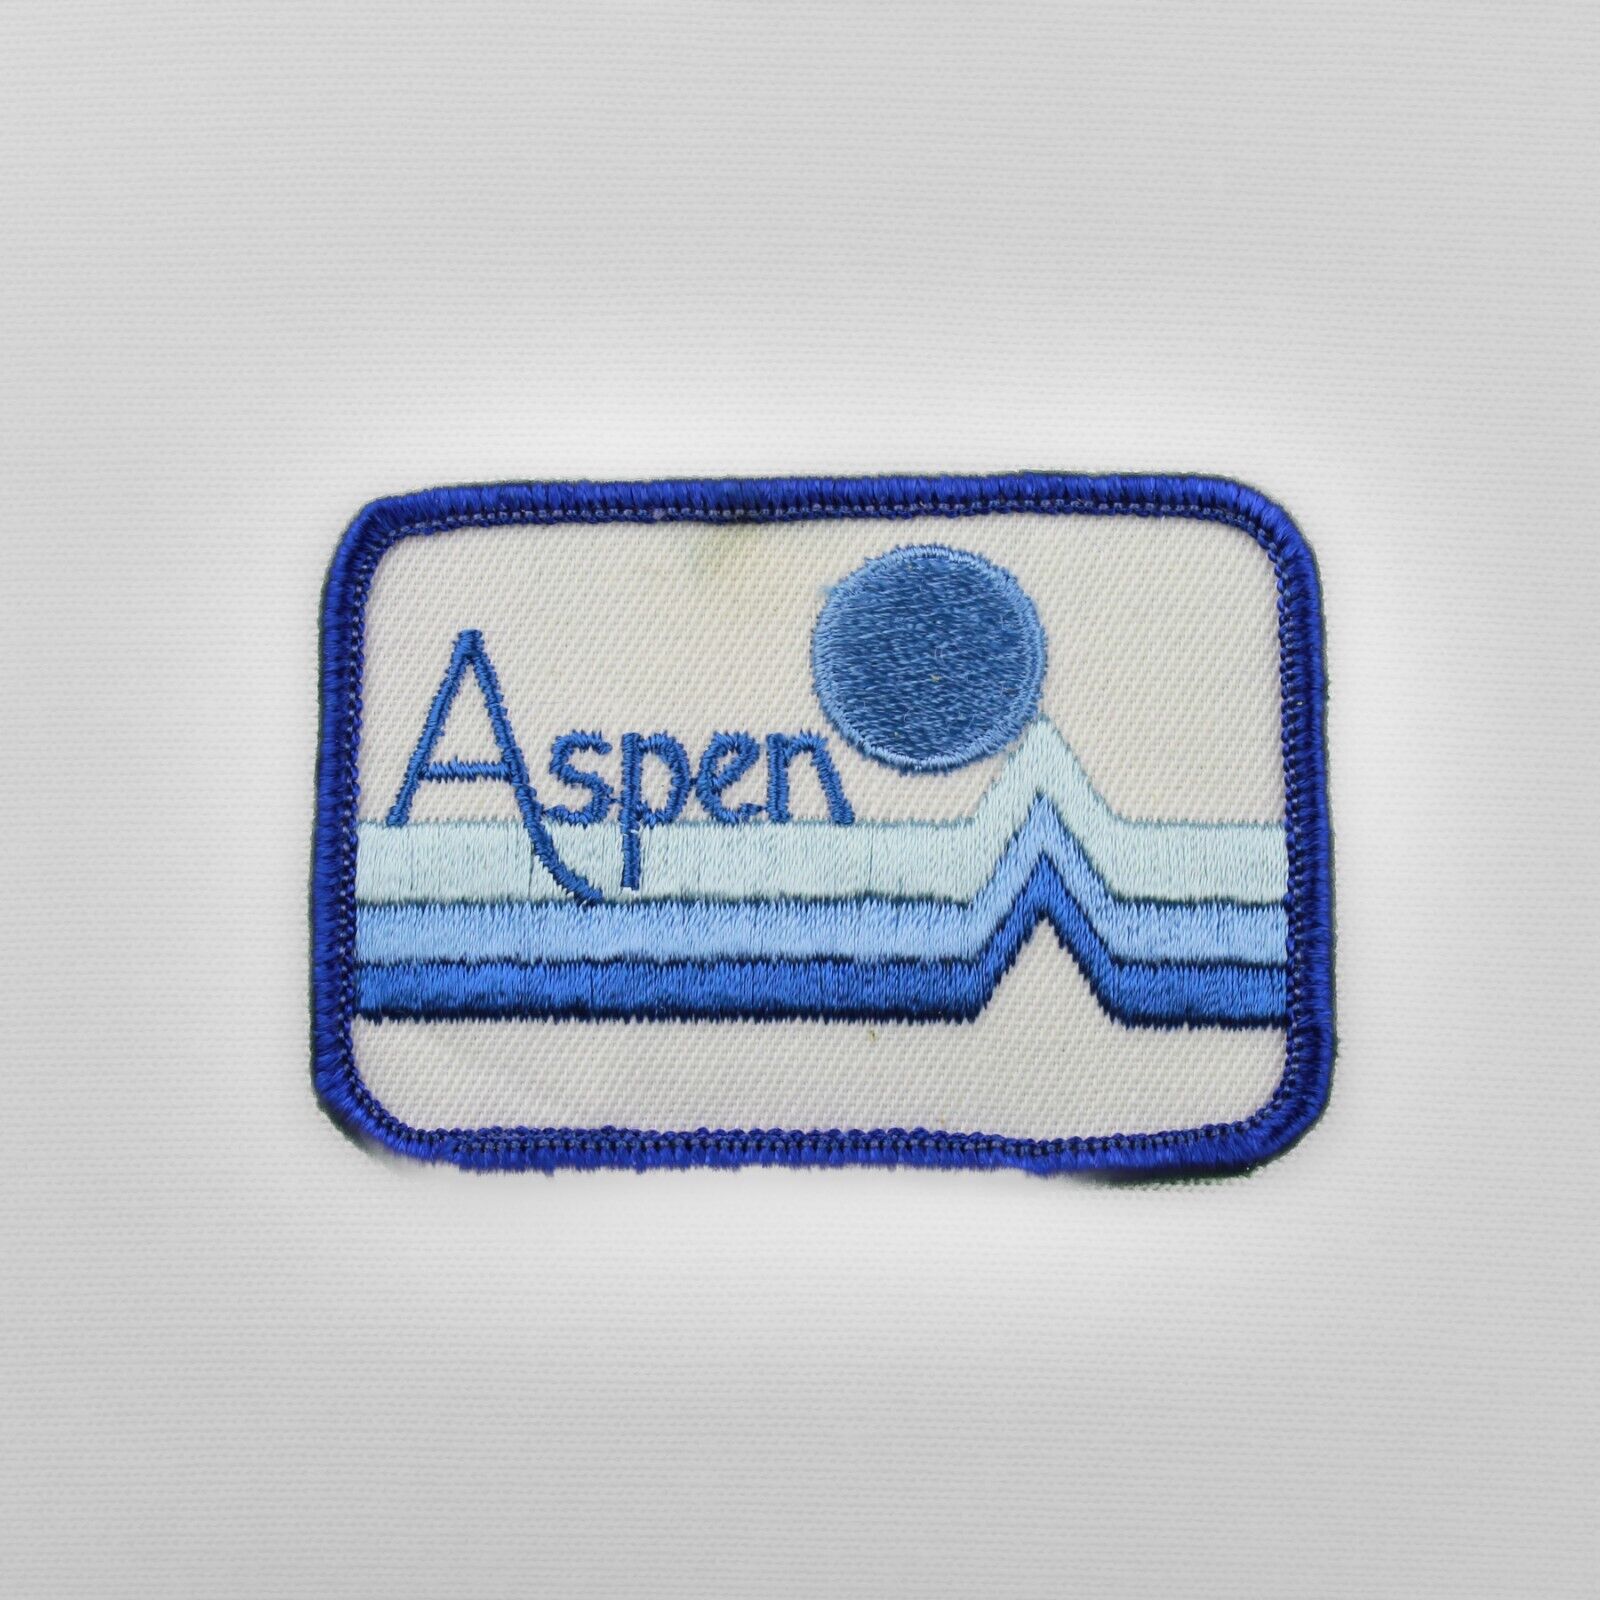 Vintage Embroidered Aspen Colorado Ski Resort Skiing Sew On Patch NOS